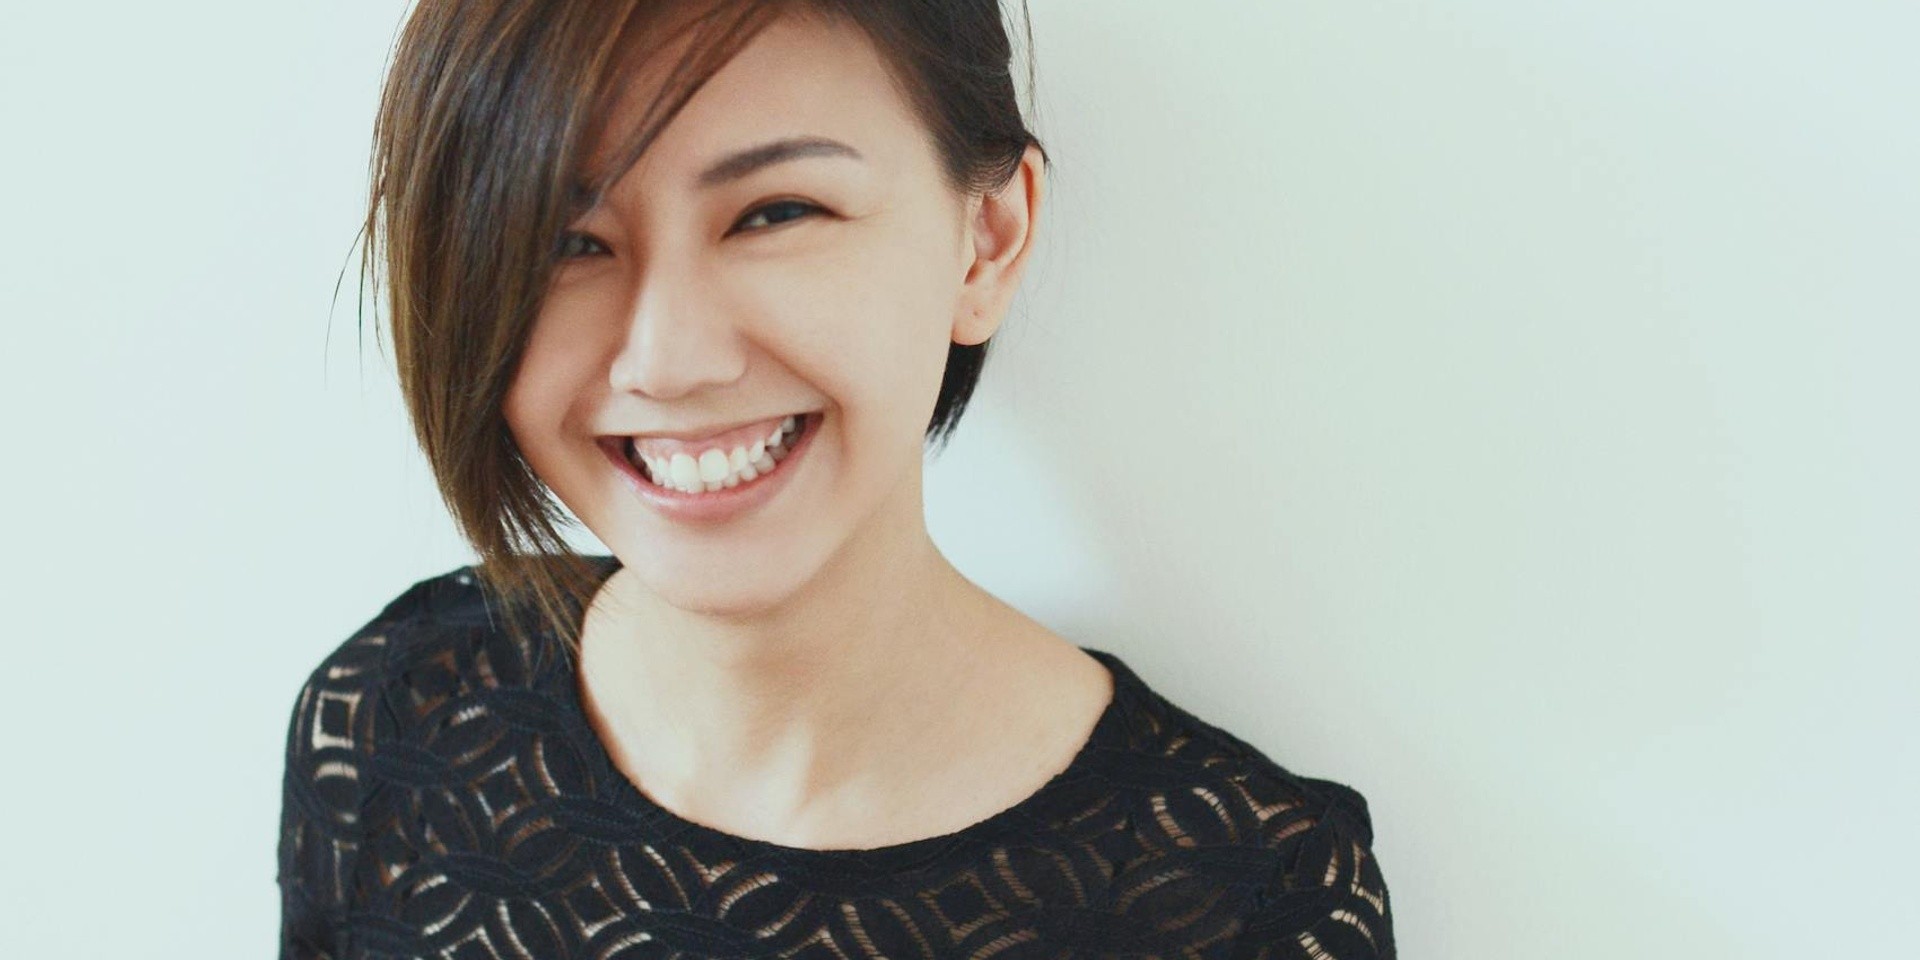 No, Stefanie Sun is not quitting music to go into financial tech